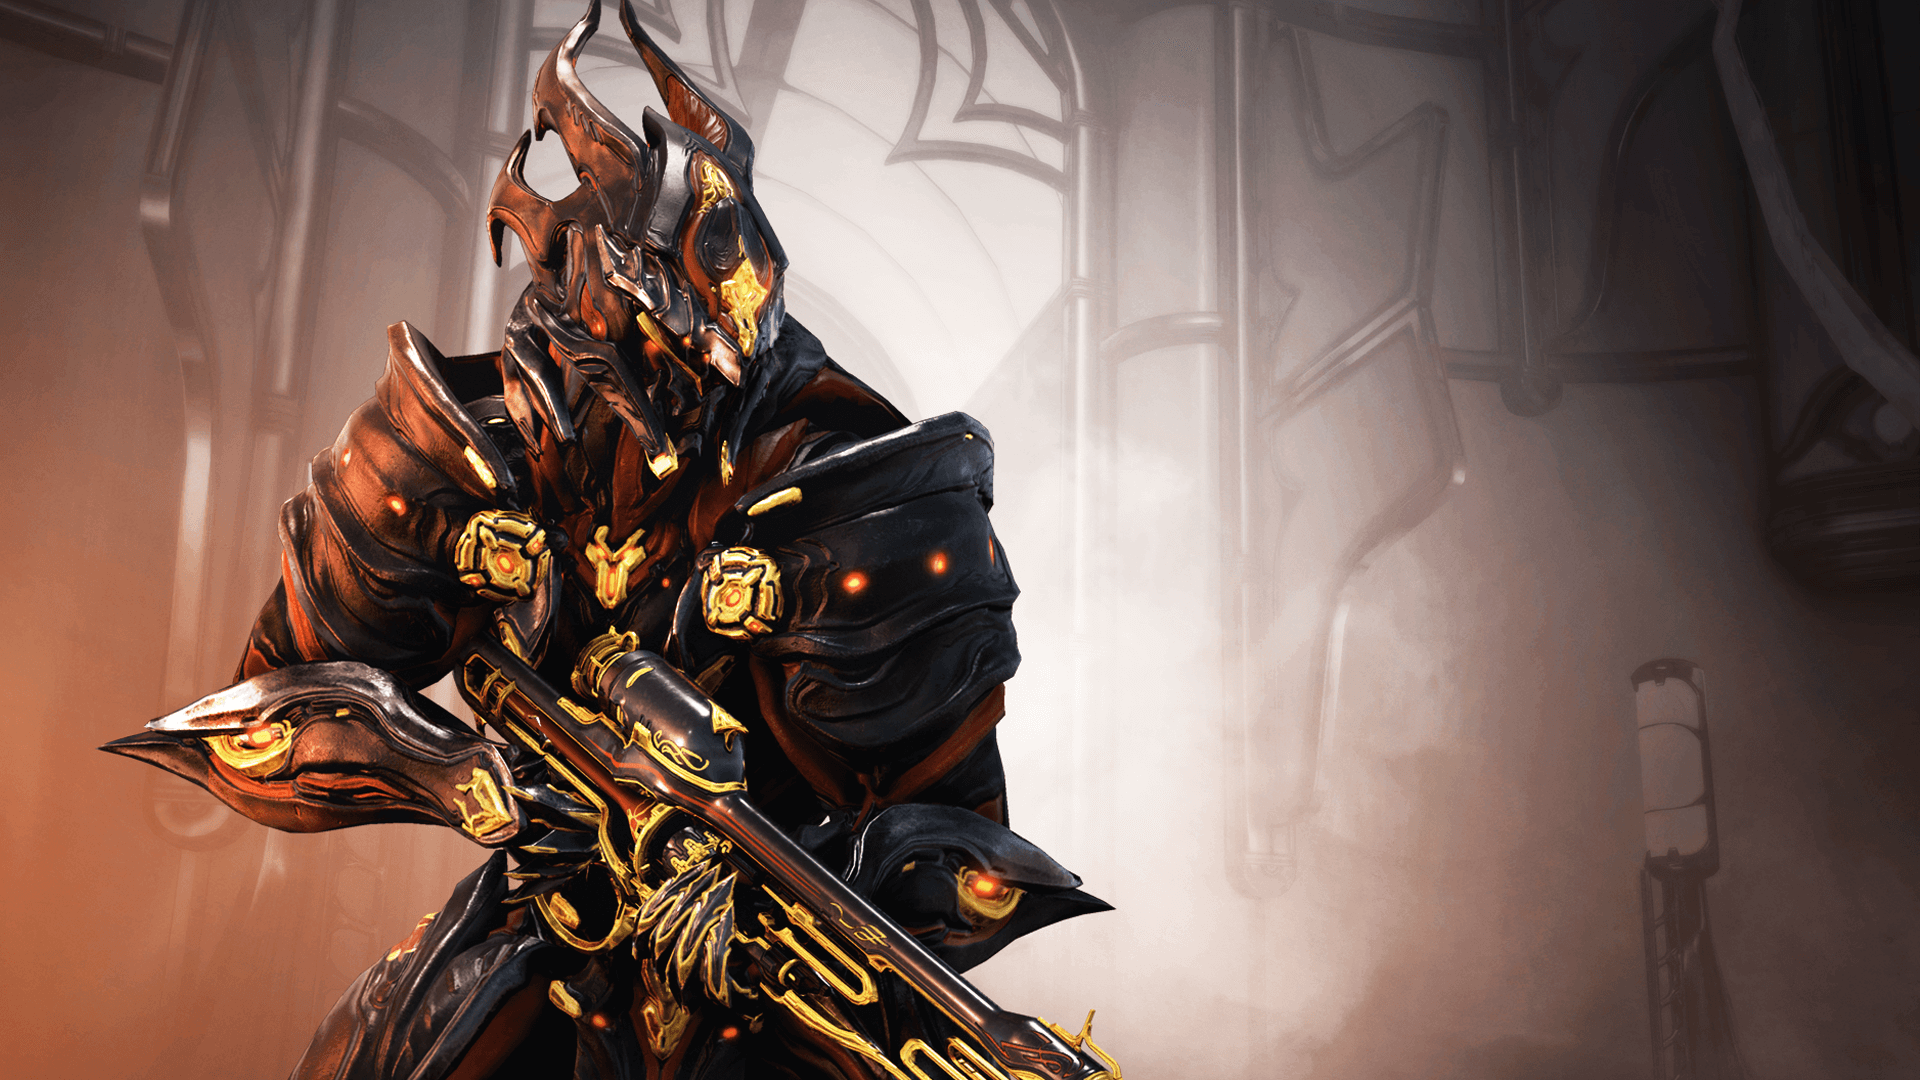 TennoCon Digital Pack: Price, items, and more details on Warframe's new ...